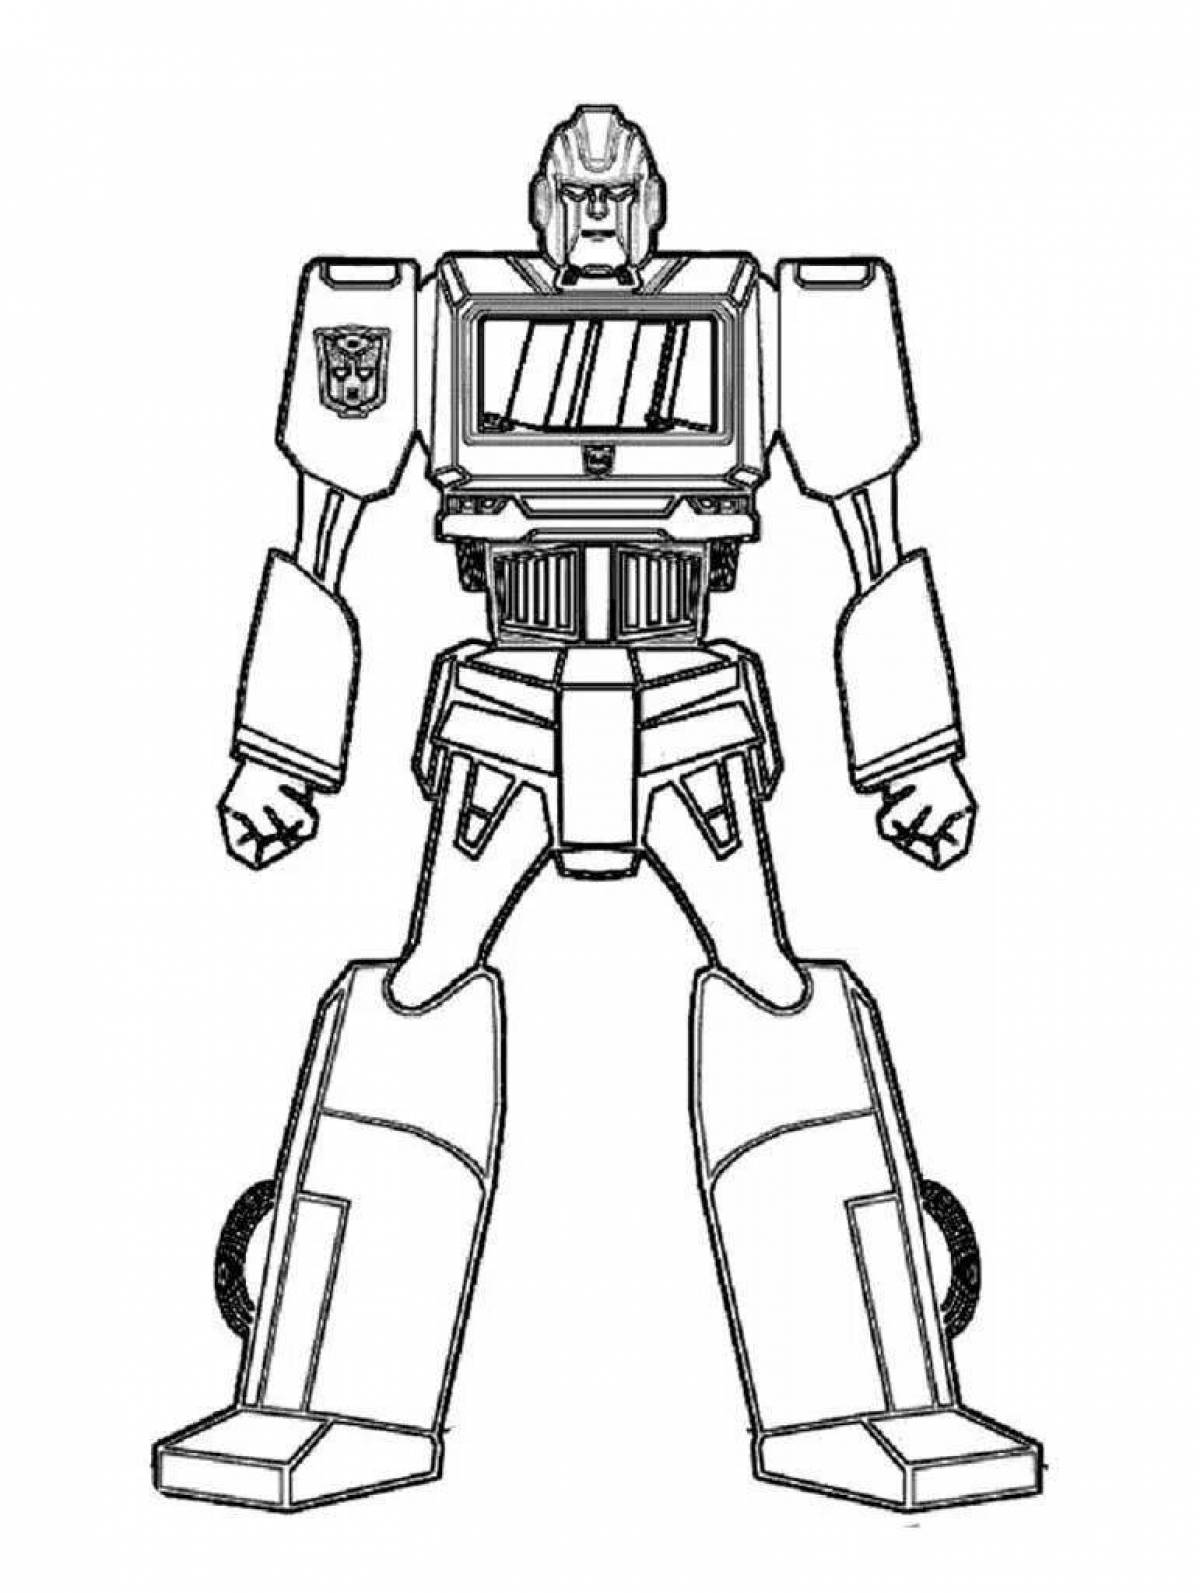 Amazing robot coloring pages for boys 5-6 years old